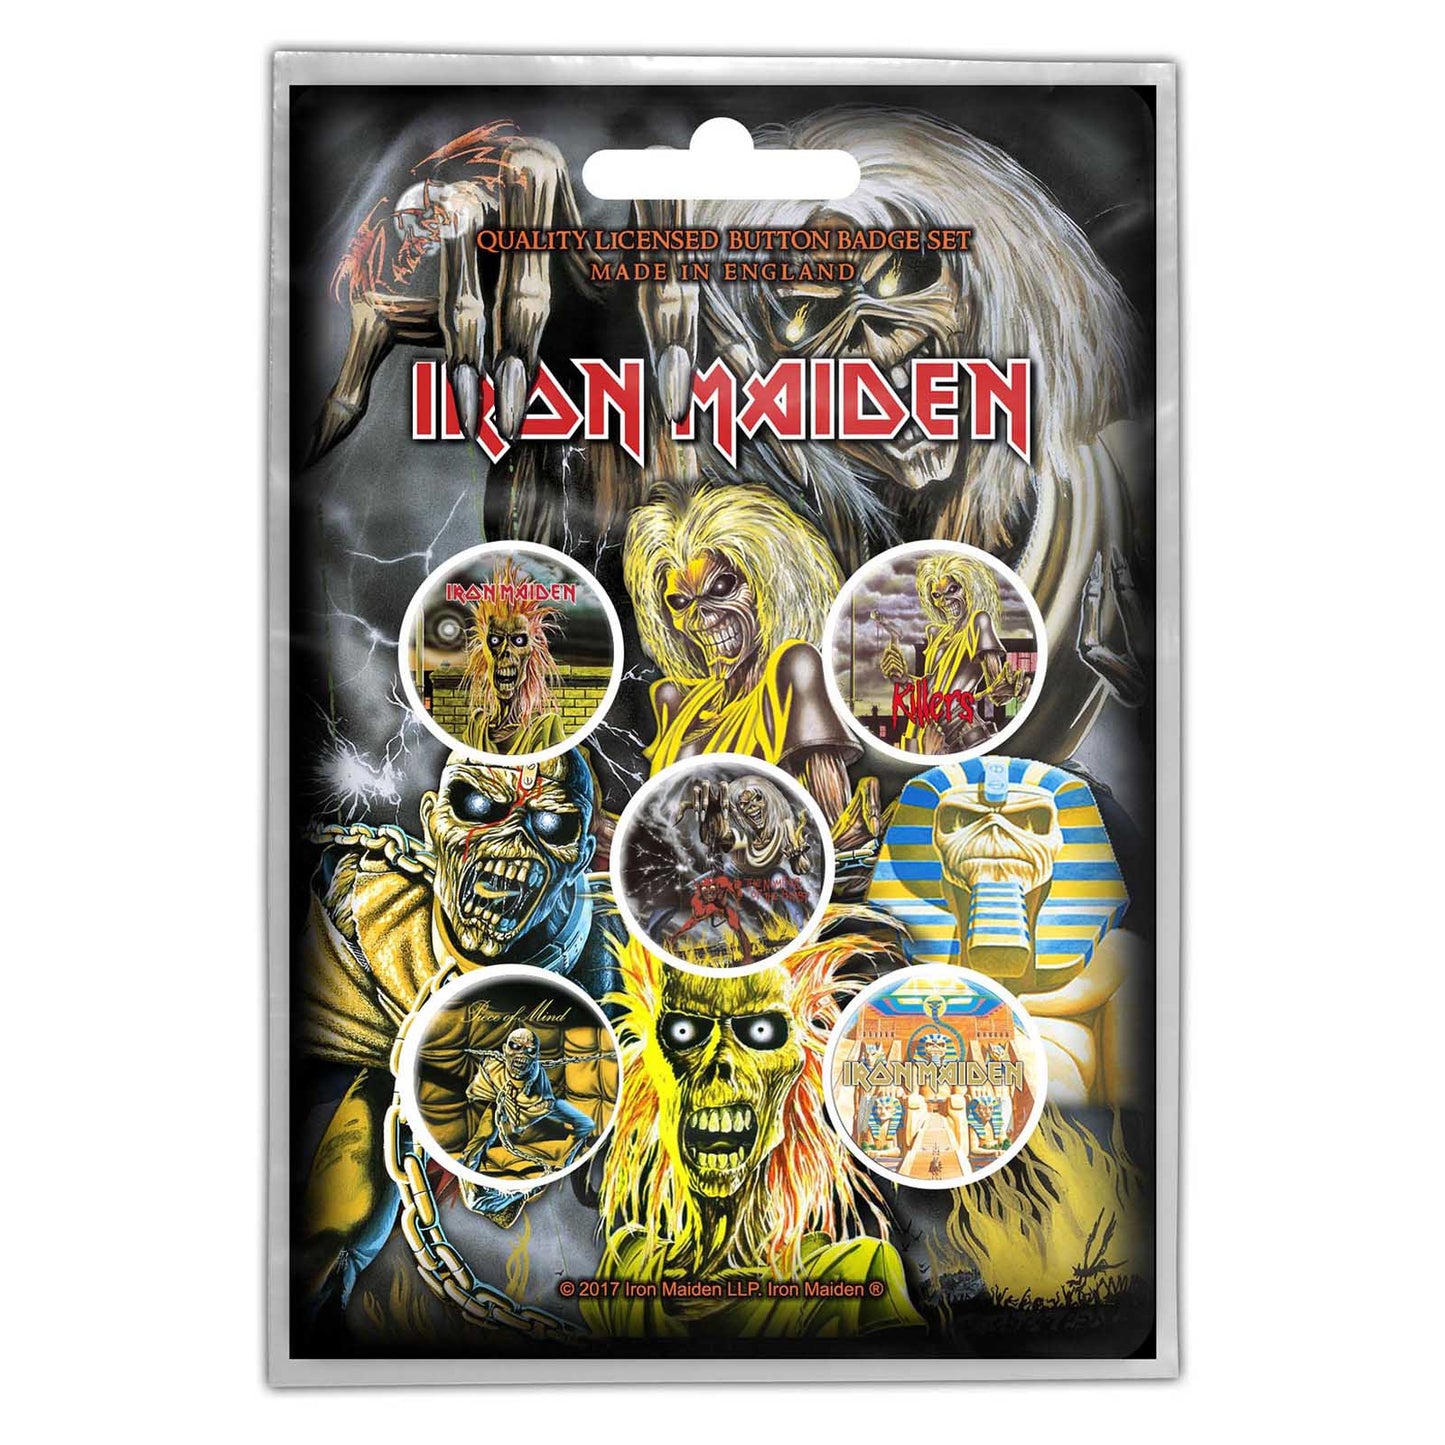 IRON MAIDEN - Early Albums Badge Pack